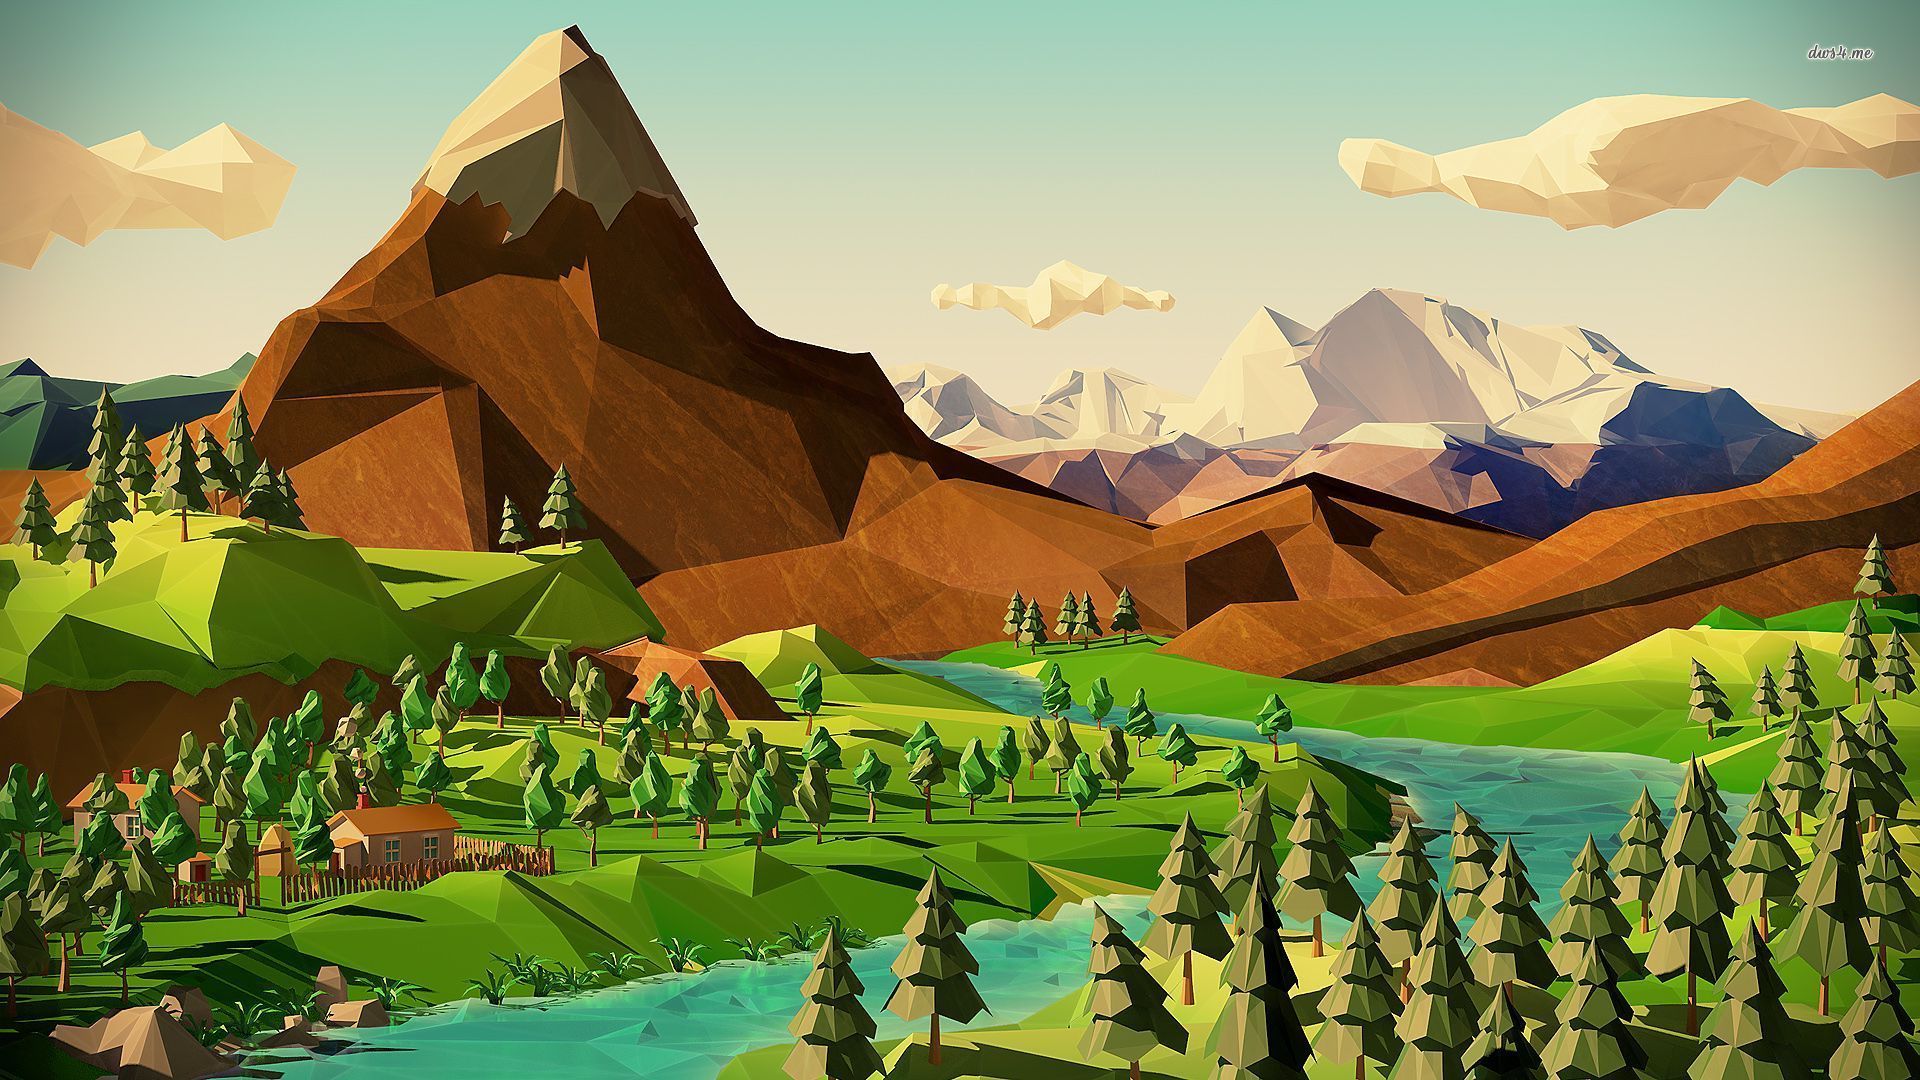 Polygon Mountain Scenery Wallpaper - Low Poly Landscape Background , HD Wallpaper & Backgrounds